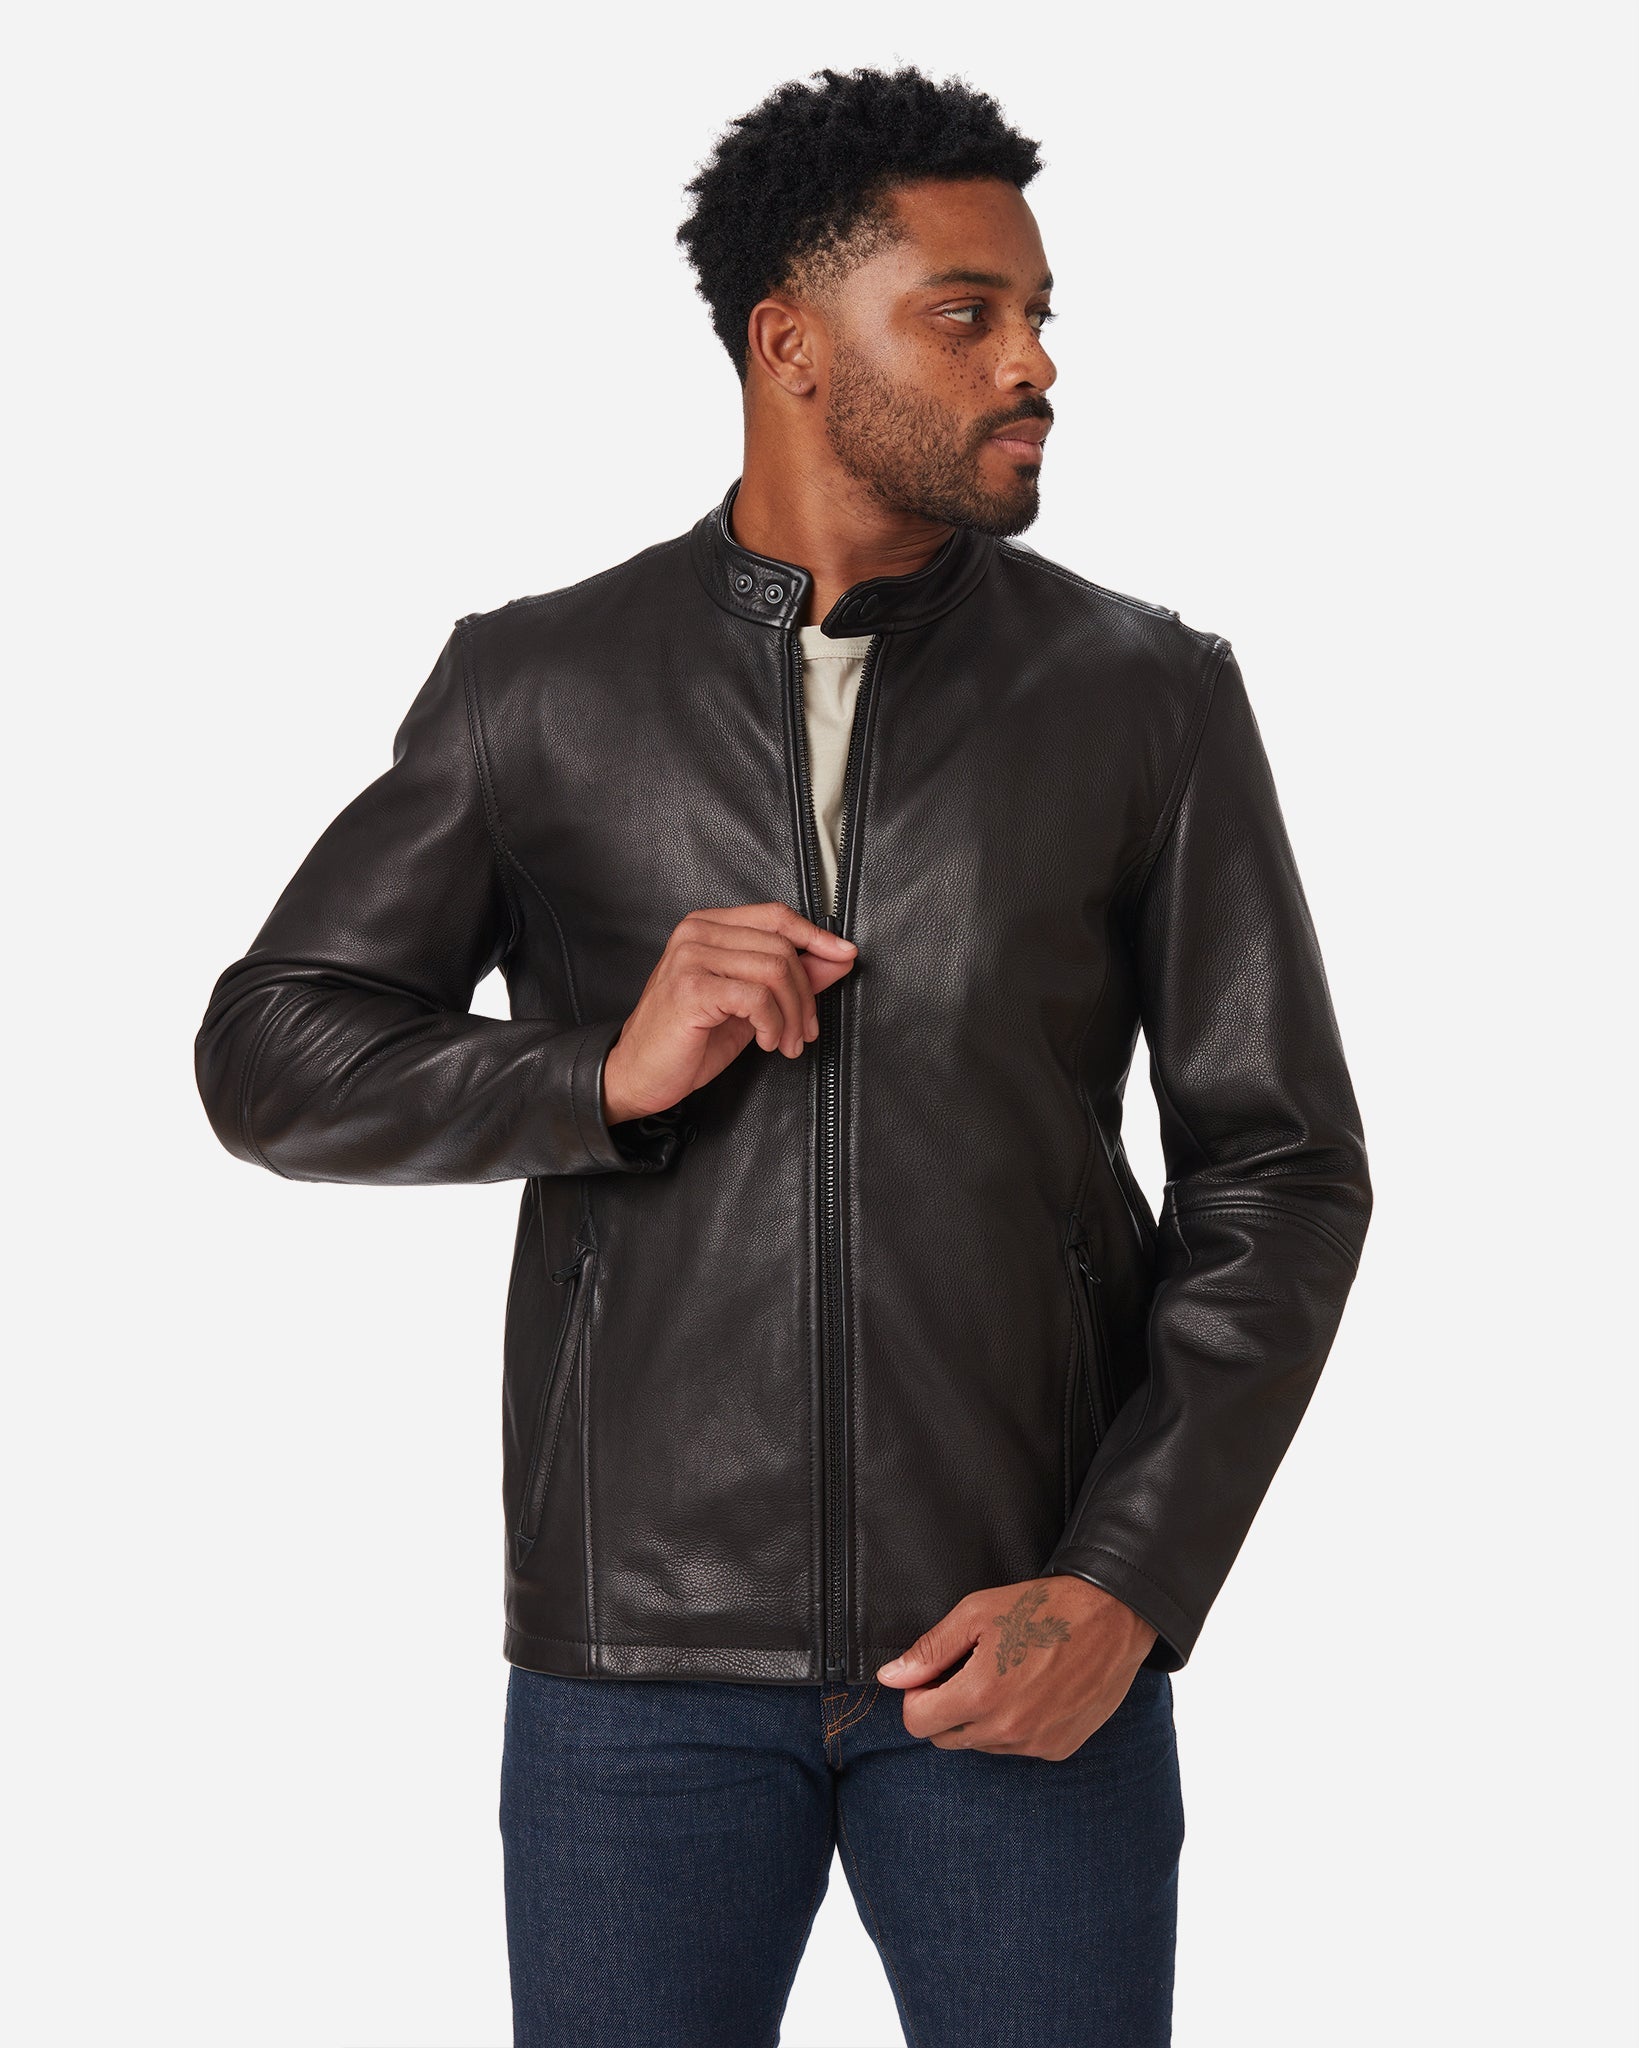 Classic Cafe Racer Leather Jacket - Mens Genuine Leather Jackets